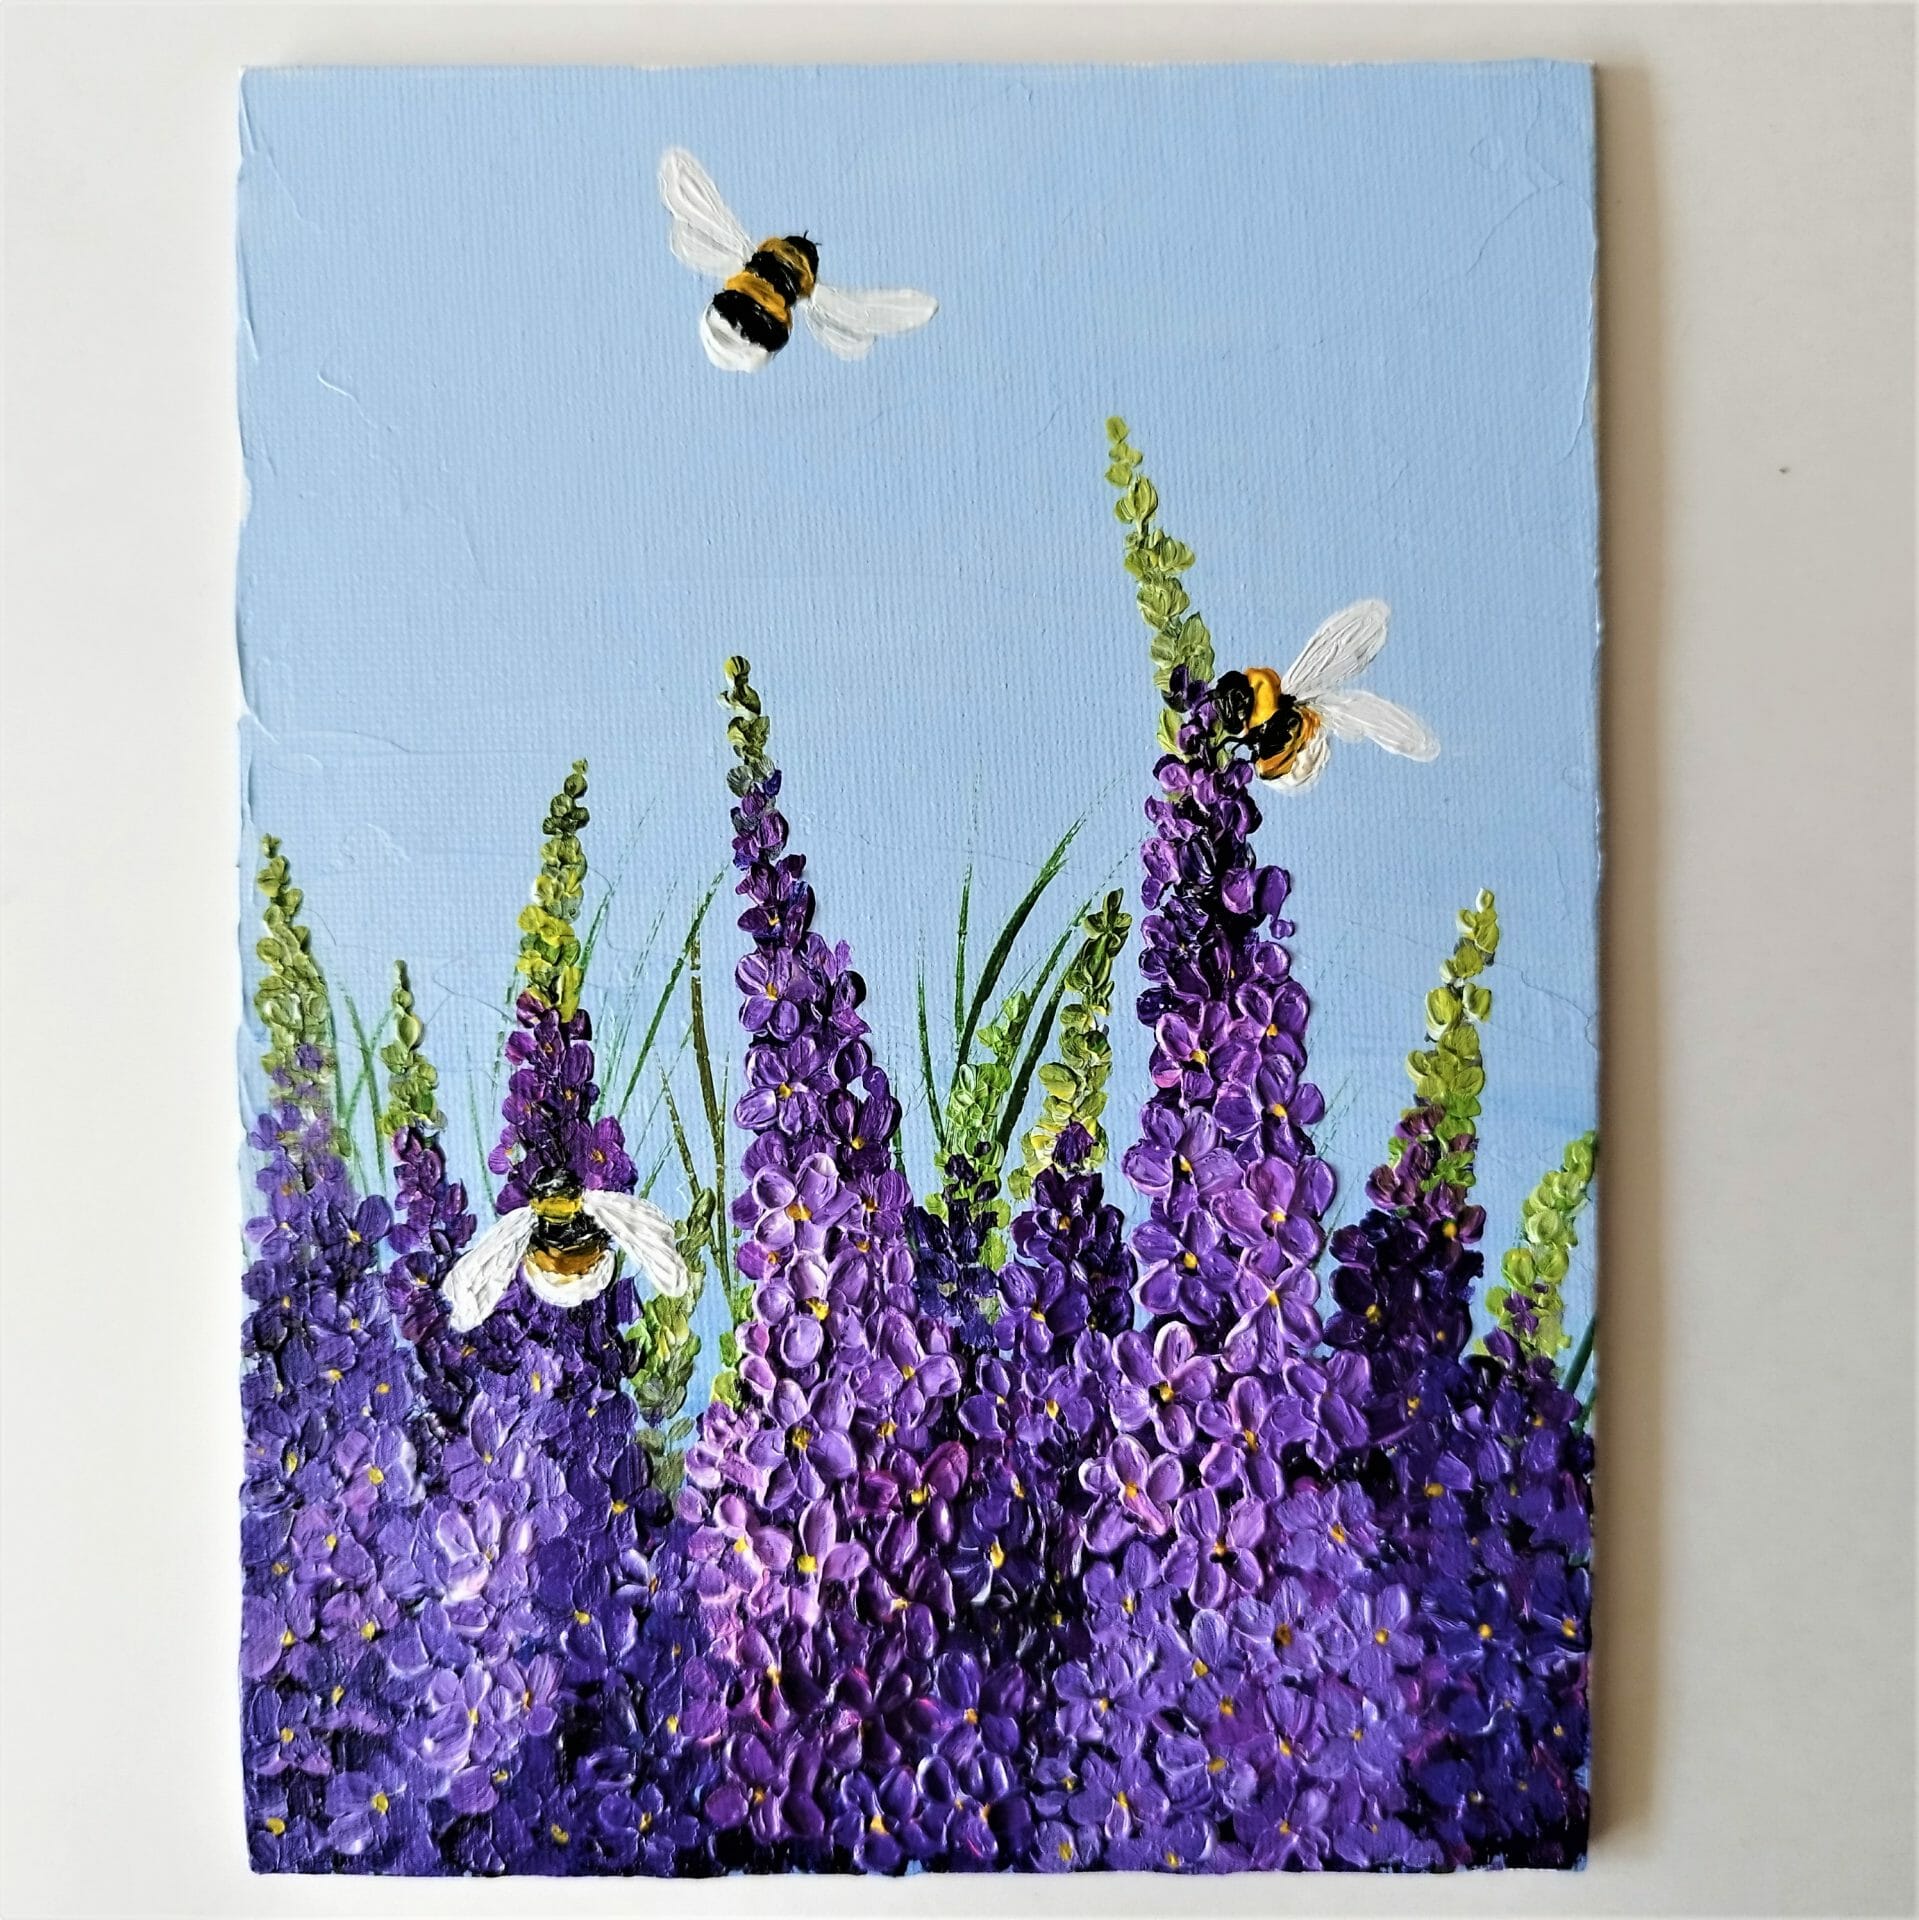 bumblebees and wildflowers acrylic painting on canvas board